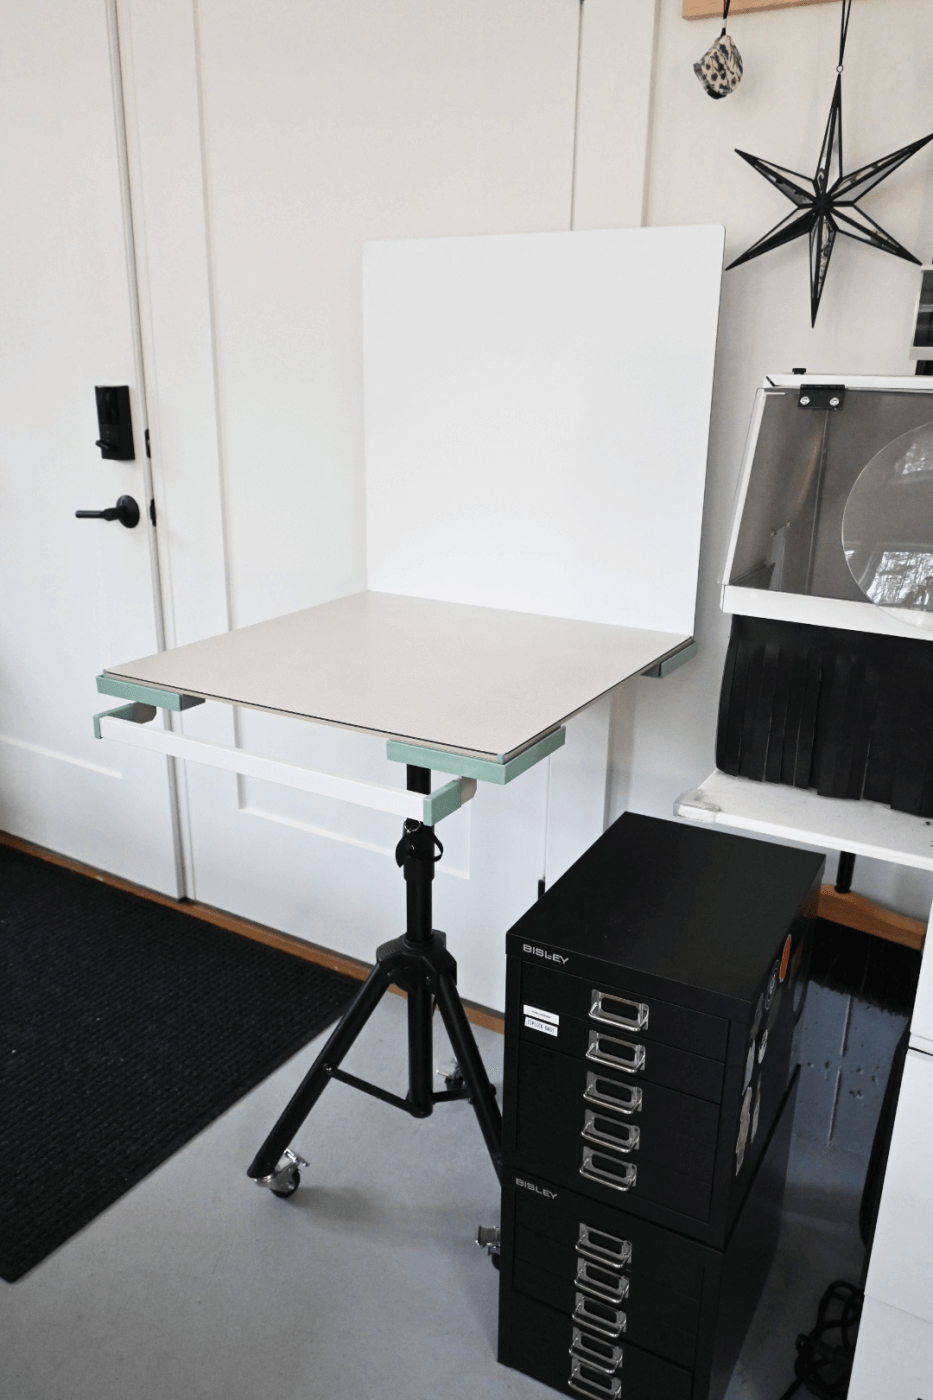 Replica Surfaces Studio used to photograph jewelry.